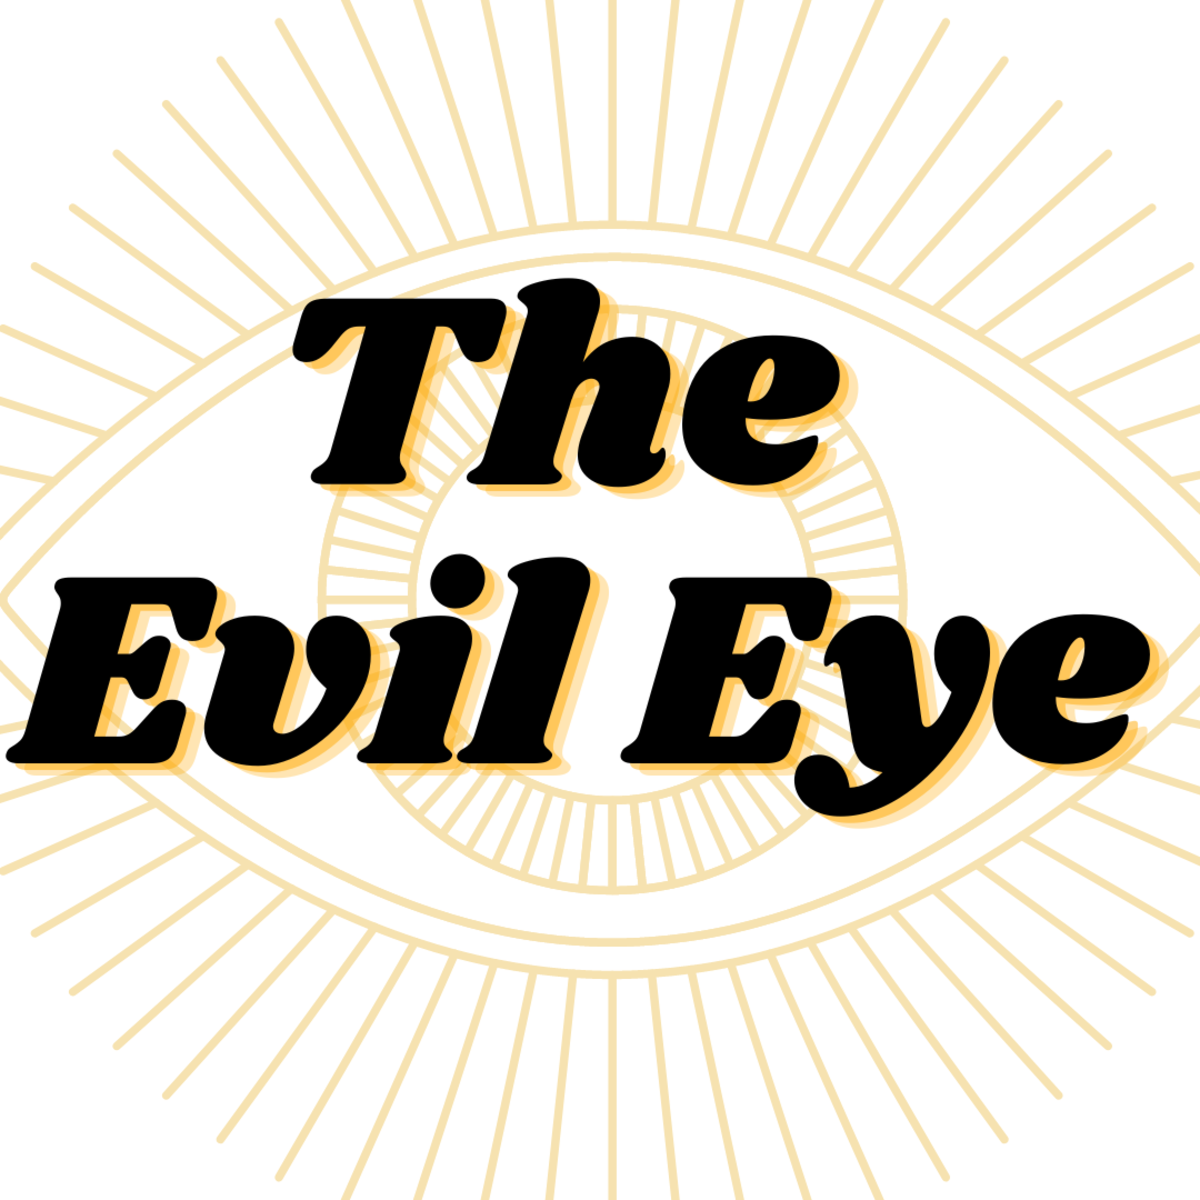 Learn about the evil eye and how to protect yourself.